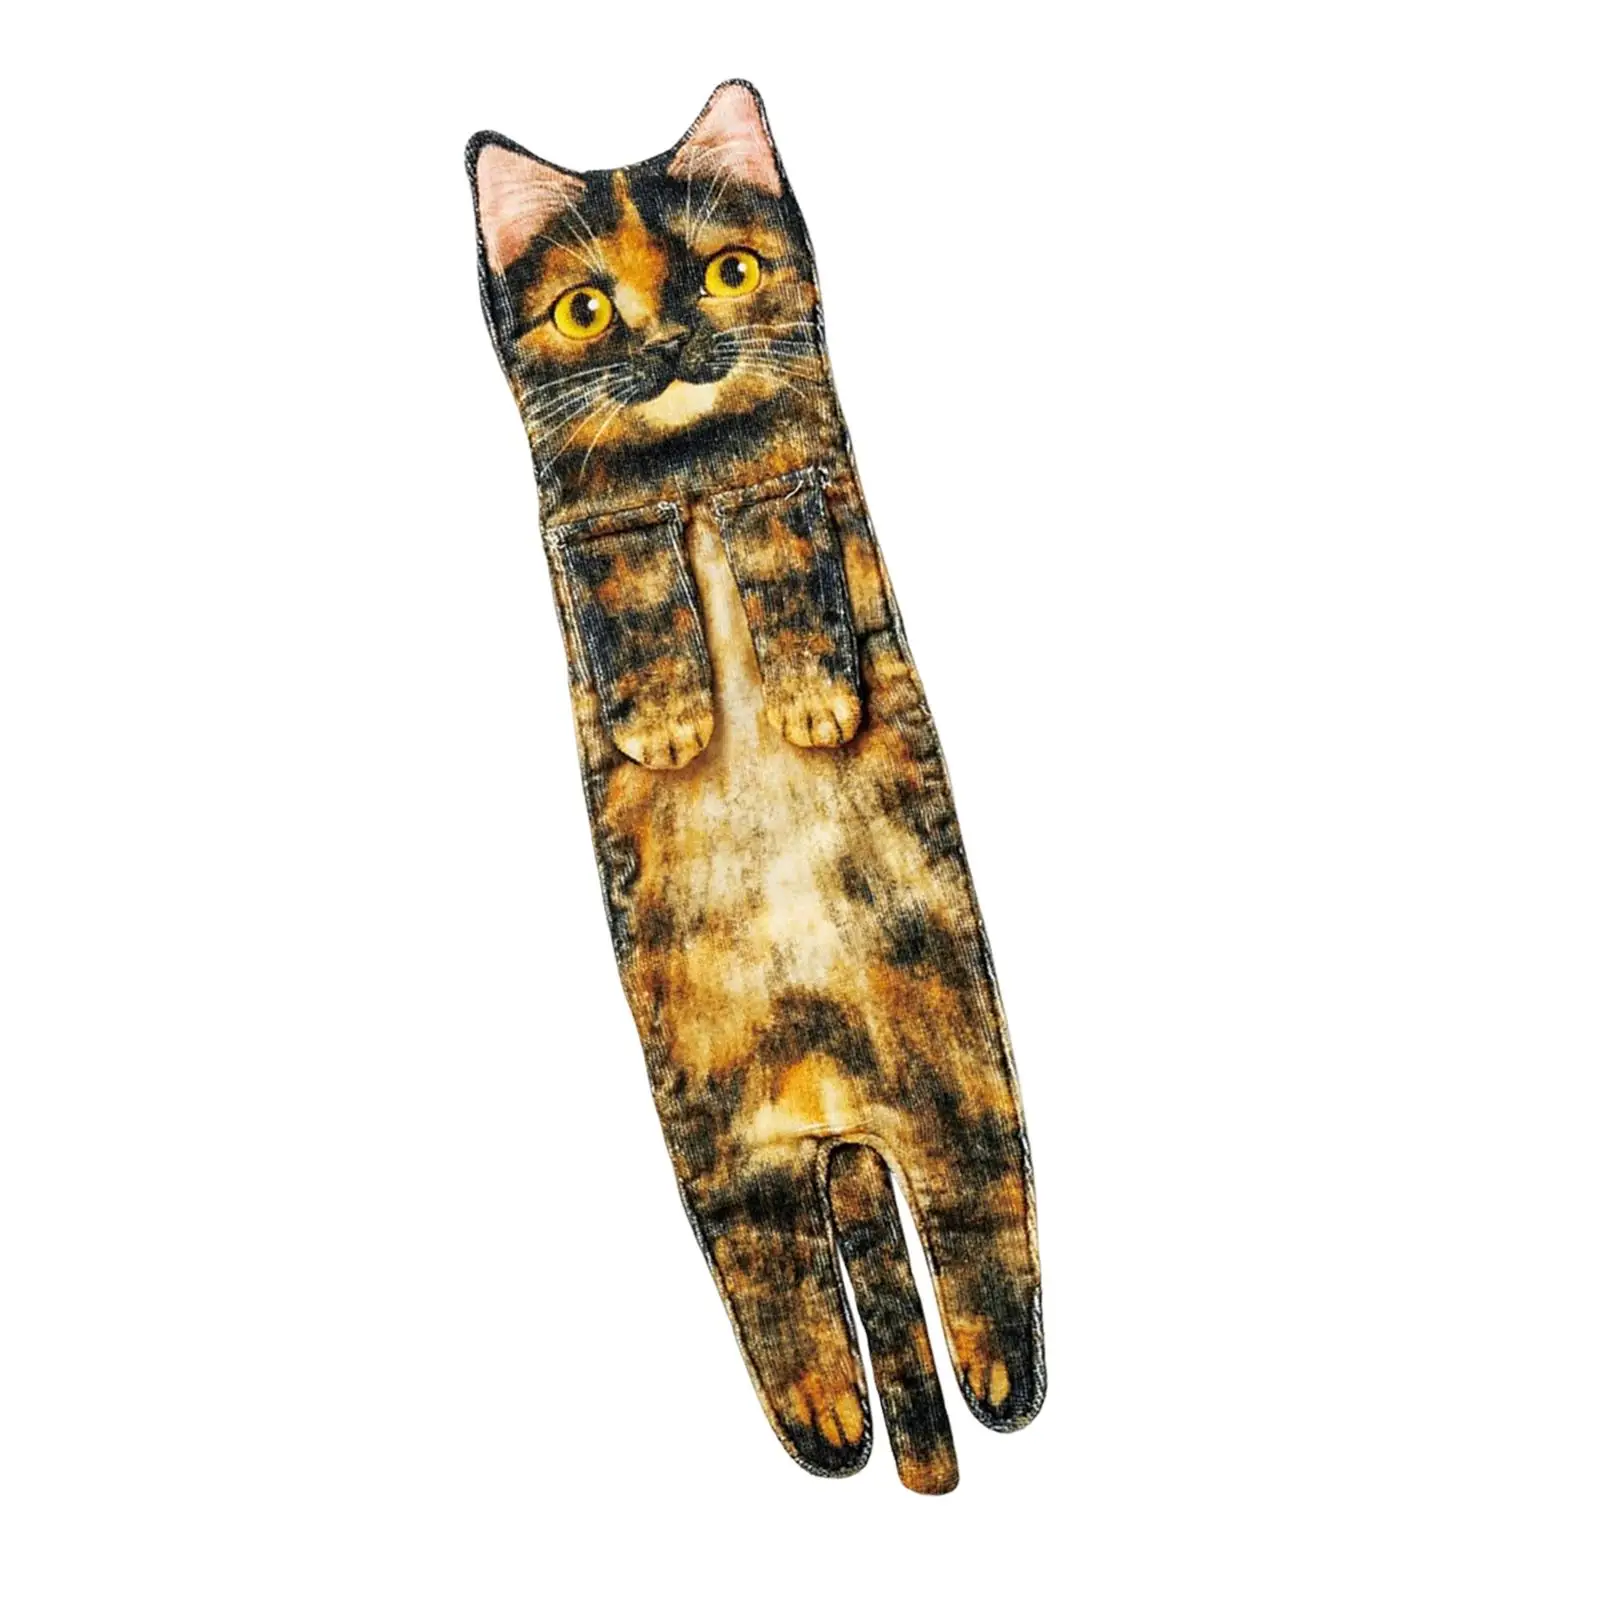 Cat Cute Hand Towels Hanging Drying Hands Gifts for Women Decorative Accessories